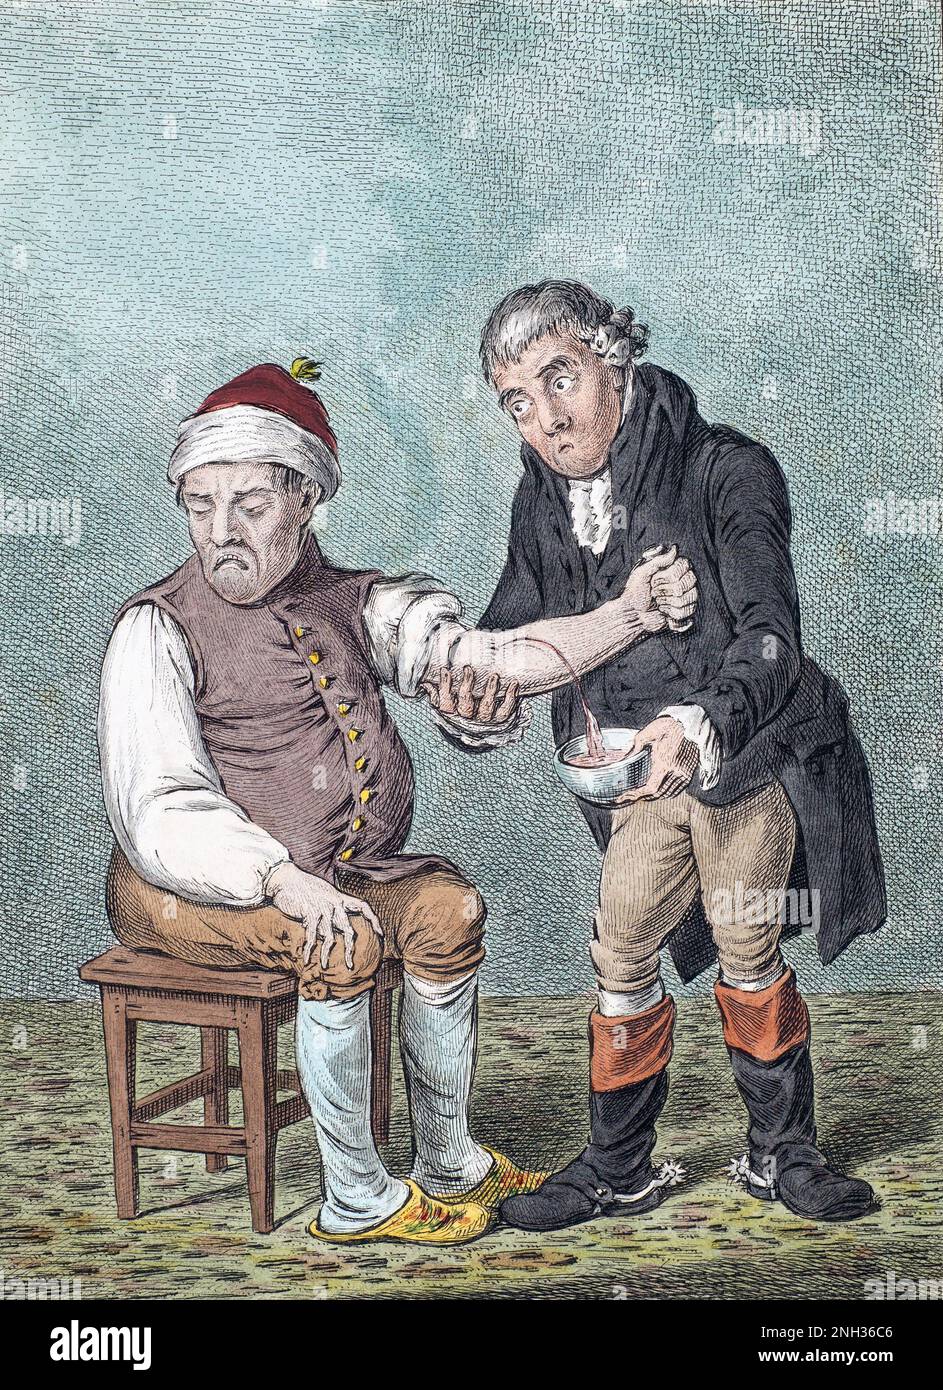 Breathing a Vein.  Bloodletting was a standard practice from antiquity until the late 19th century.  The practice was supposed to prevent illnesses or cure diseases, but more often than not the patient's health deteriorated.  After a work by James Gillray. Stock Photo